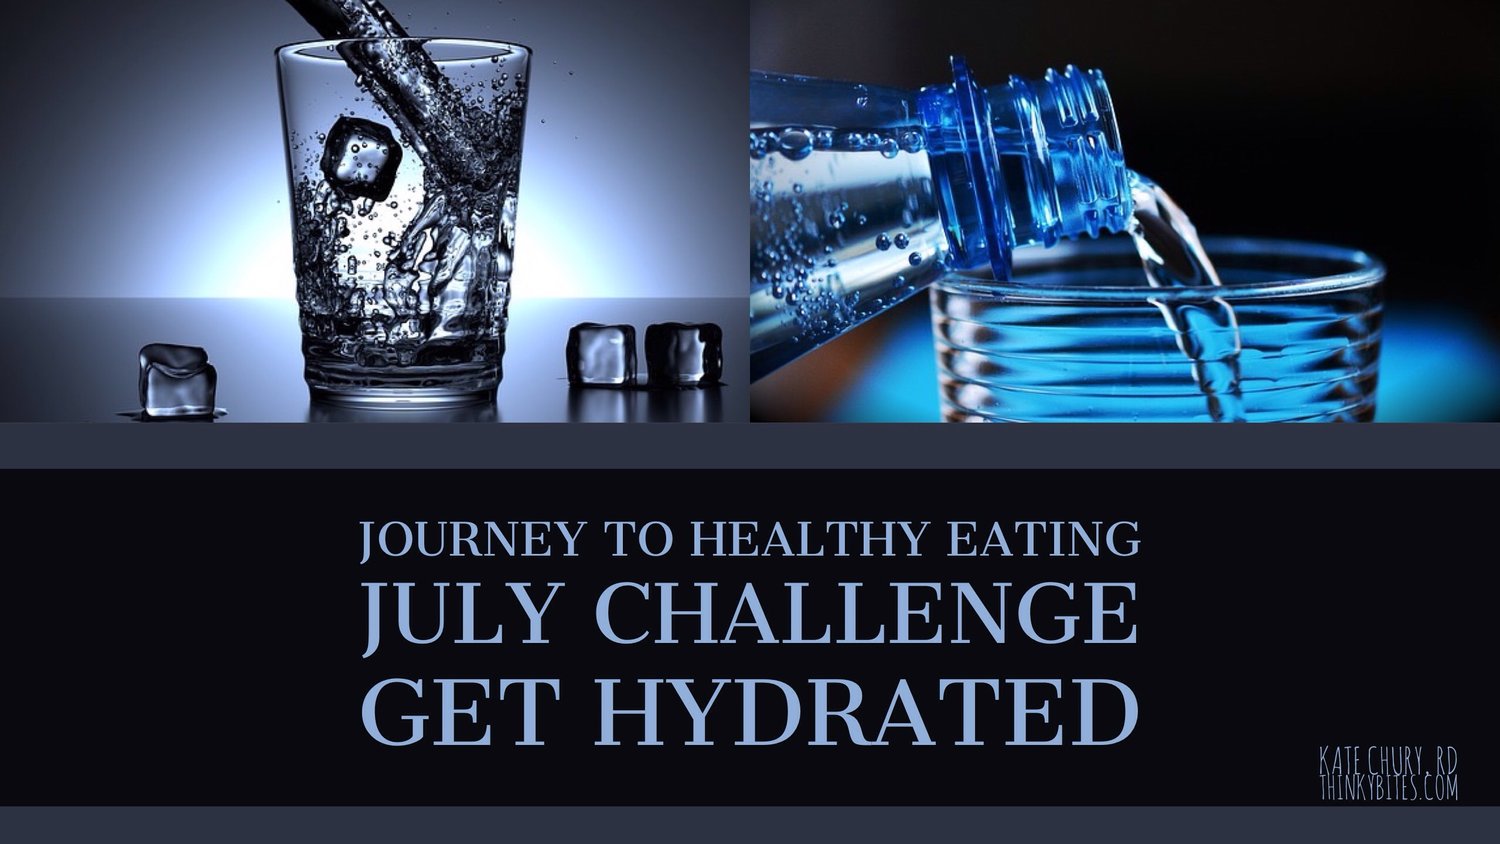 Journey To Healthy Eating 2017 - July Edition